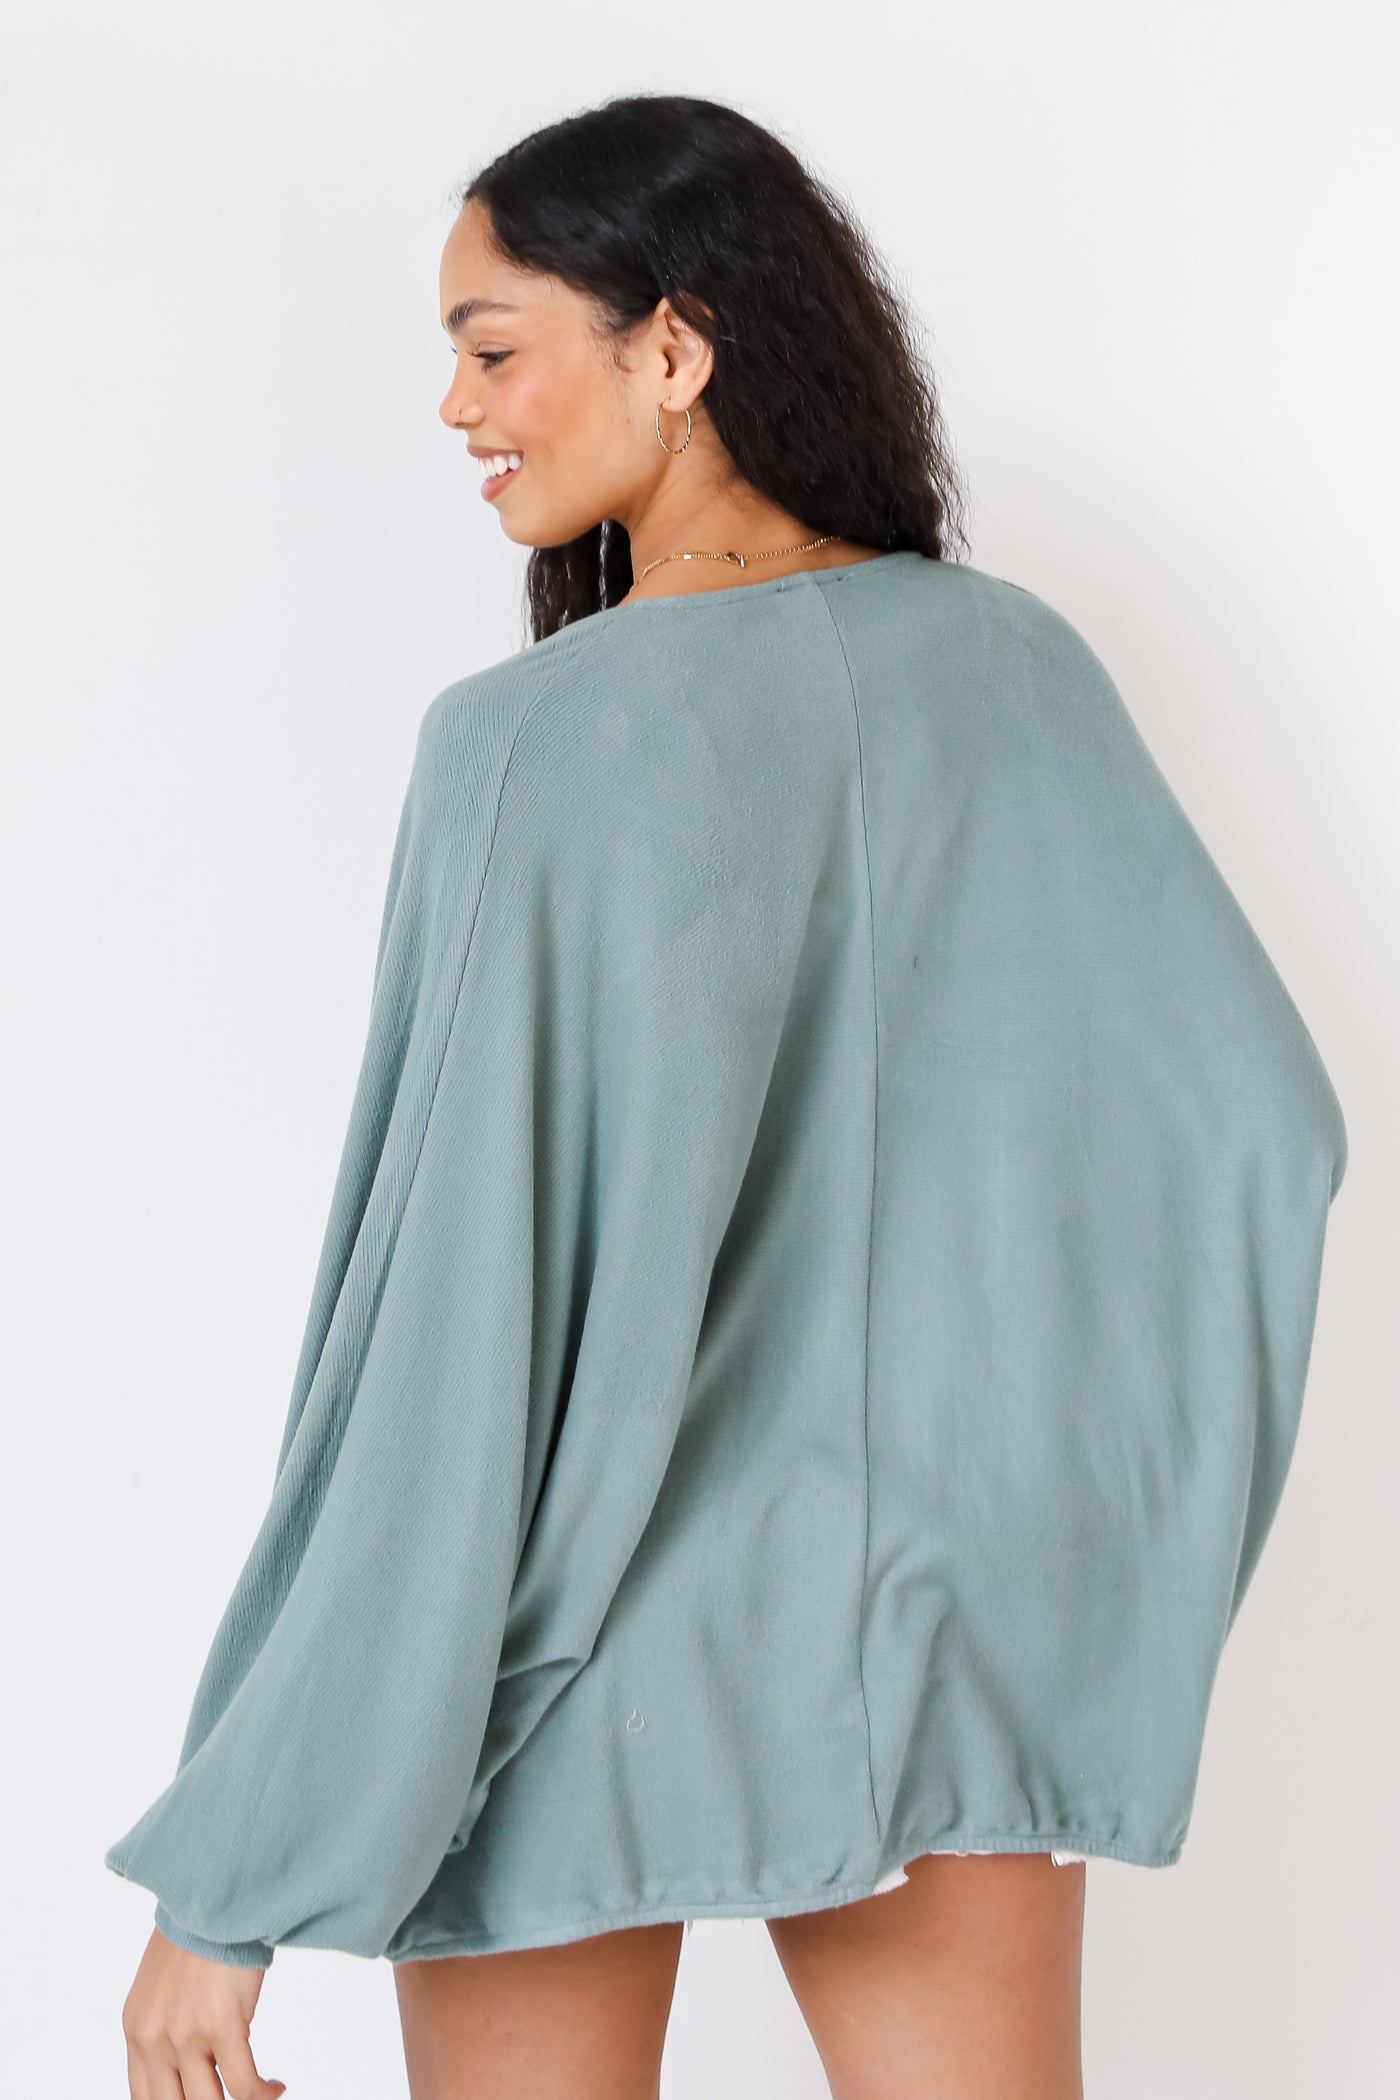 teal Cardigan back view